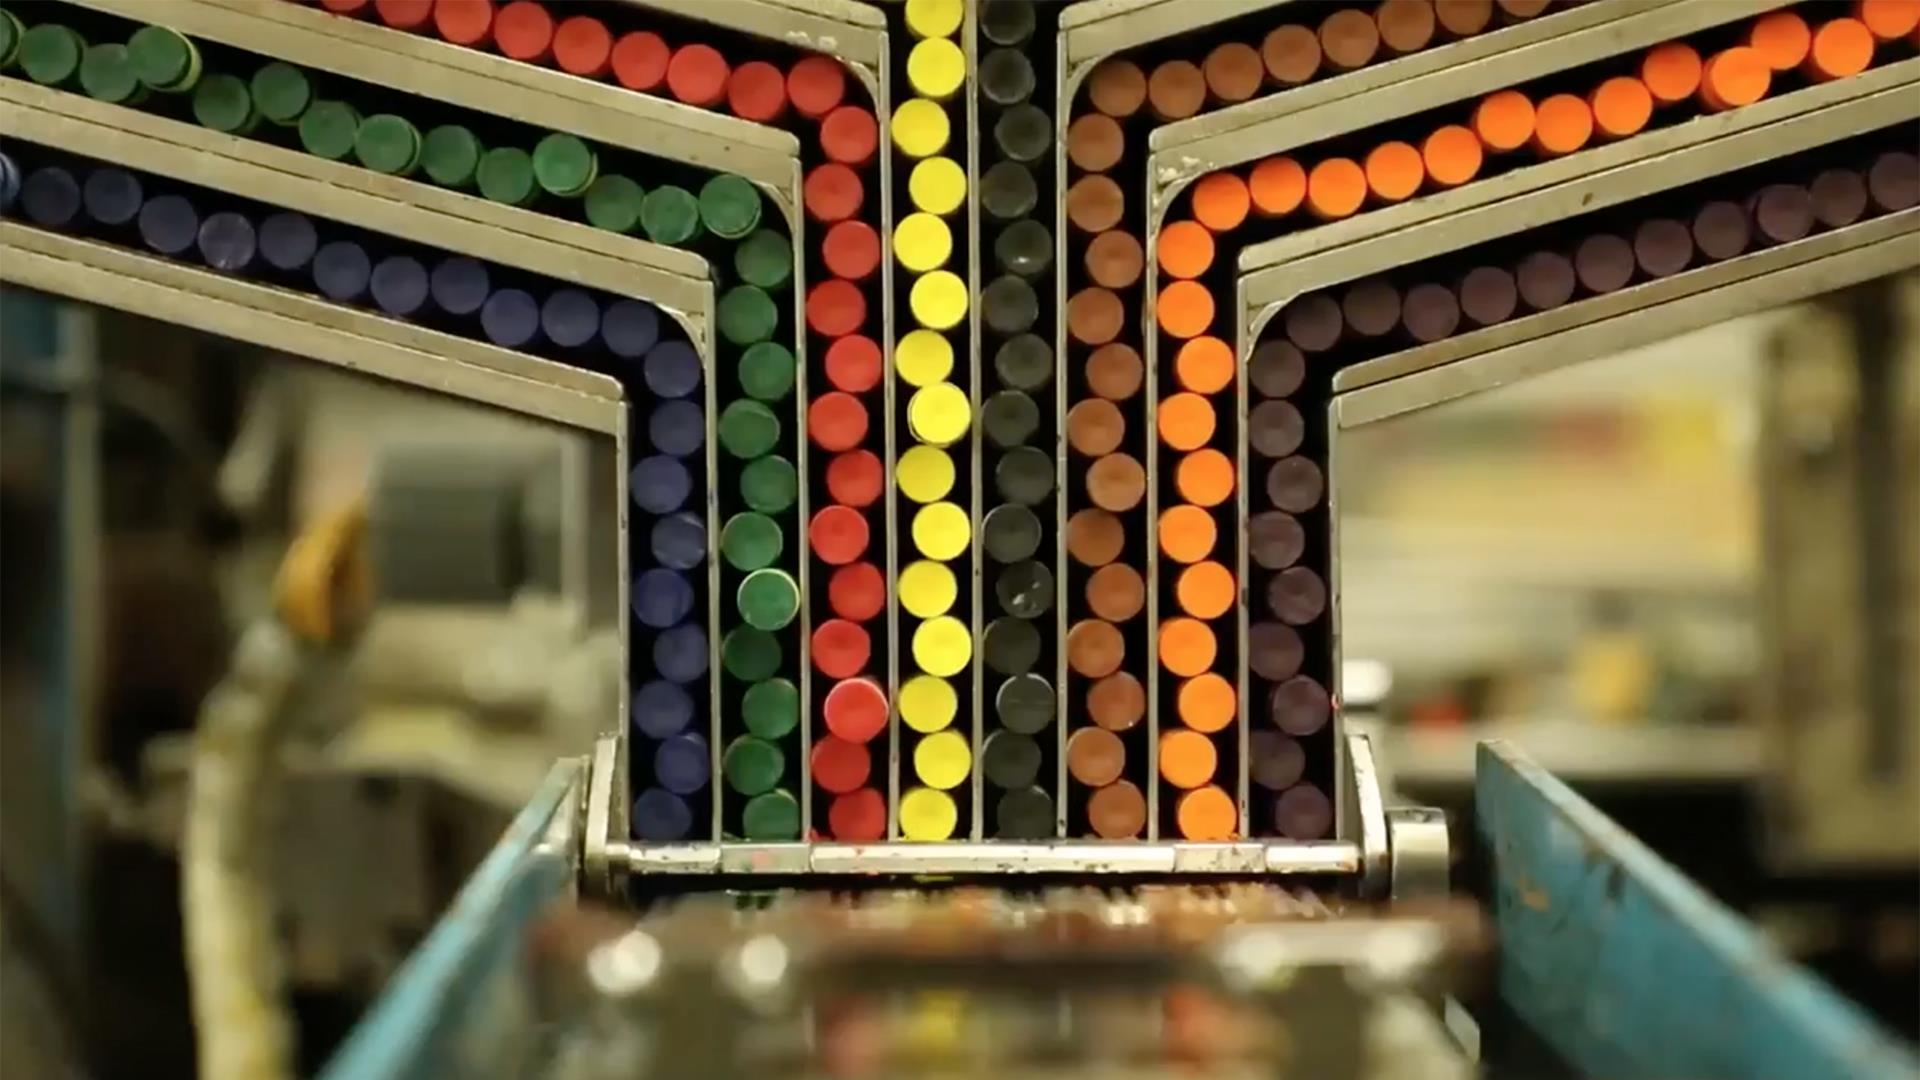 Crayola Worker Shows How They Make Iconic Crayons in 'Satisfying